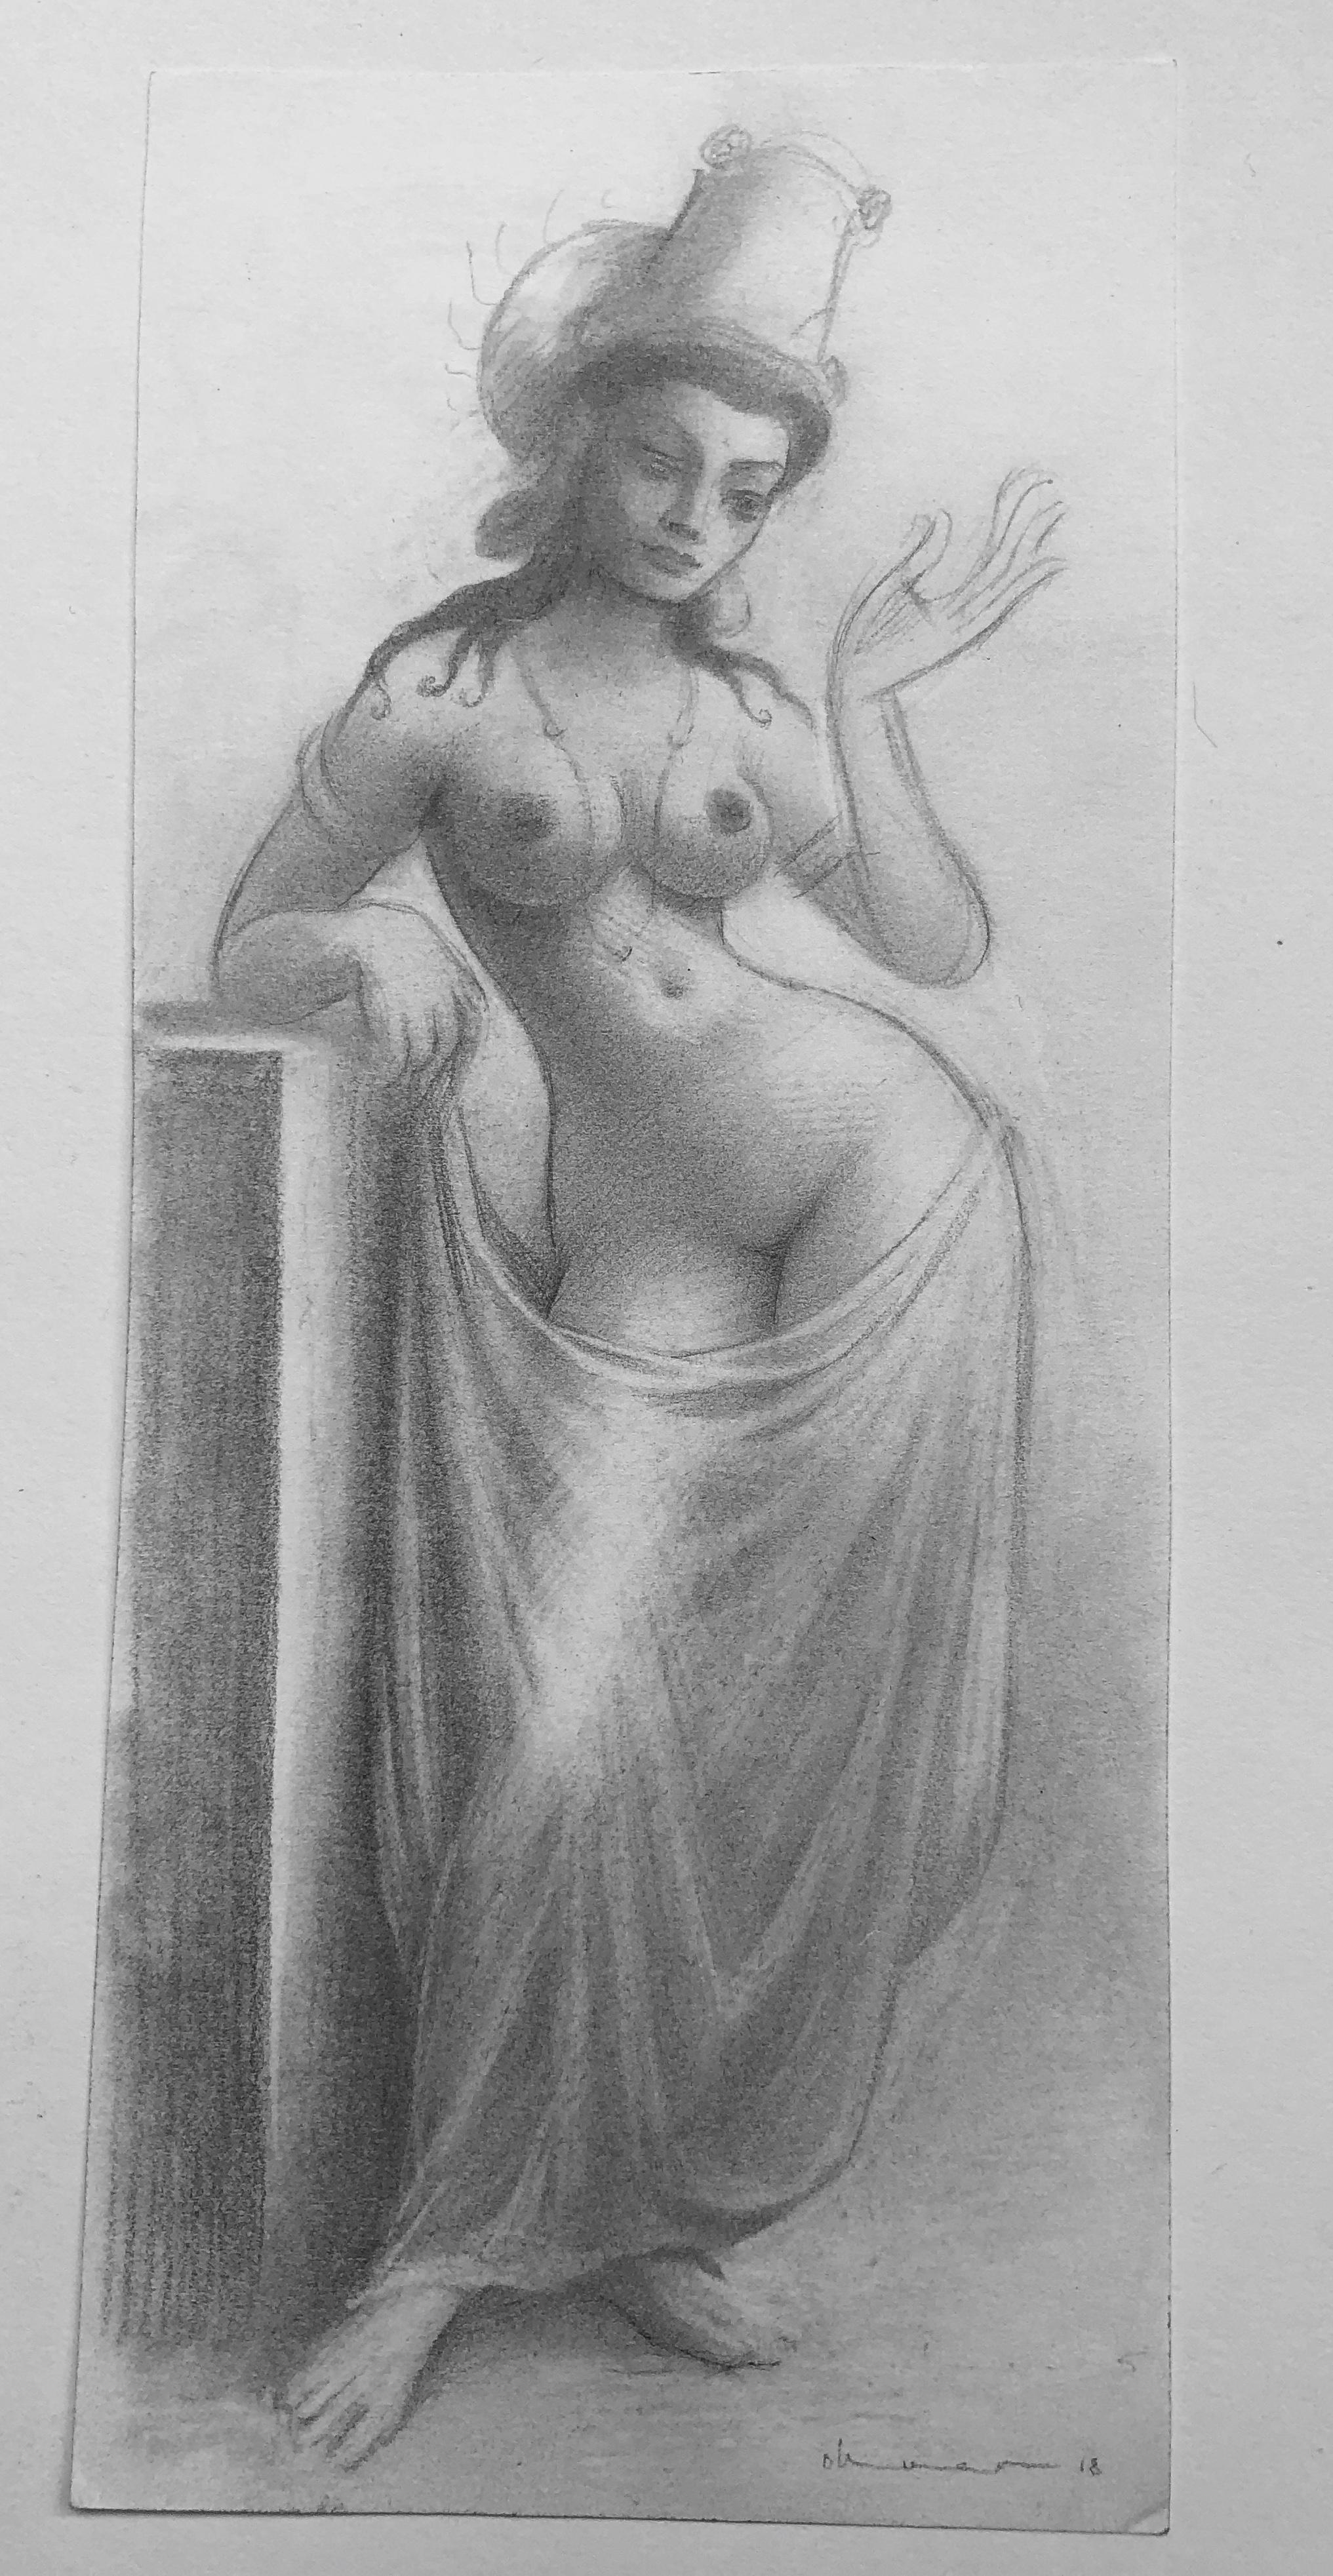 Maid of Agora - Nude Female Figure, Highly Detailed Pencil Drawing, Framed